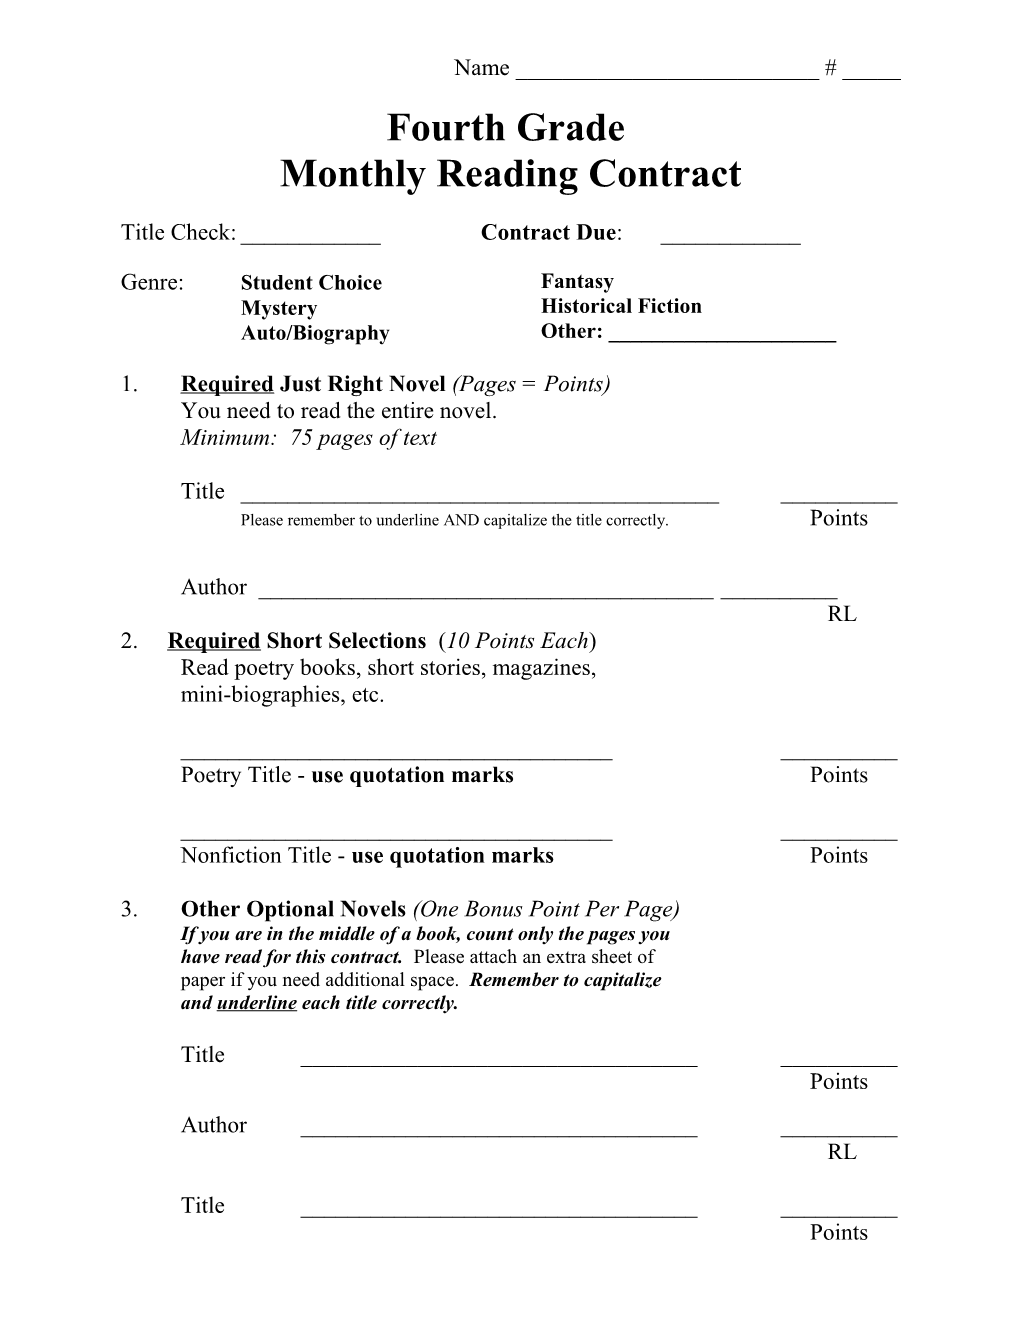 Reading Contractmaster